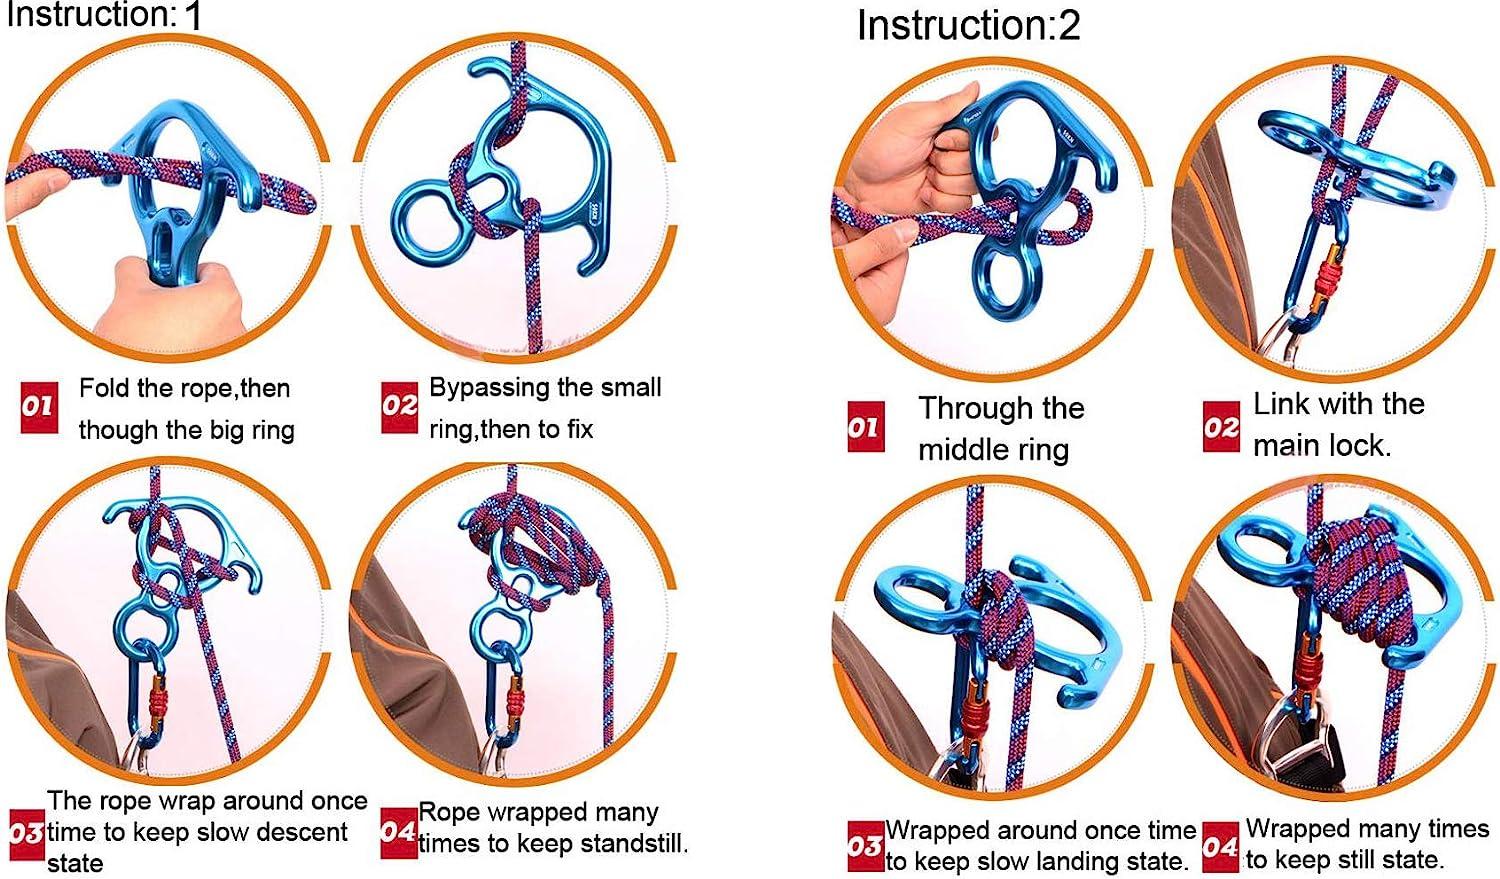 NewDoar 50KN 11000 LBF Rescue Figure,8 Descender Large Bent-Ear Belaying  and Rappelling Gear Belay Device for Rock Climbing, Aerial Dance,Ziplining  and Peak Rescue 7075 Aluminum Alloy Blue